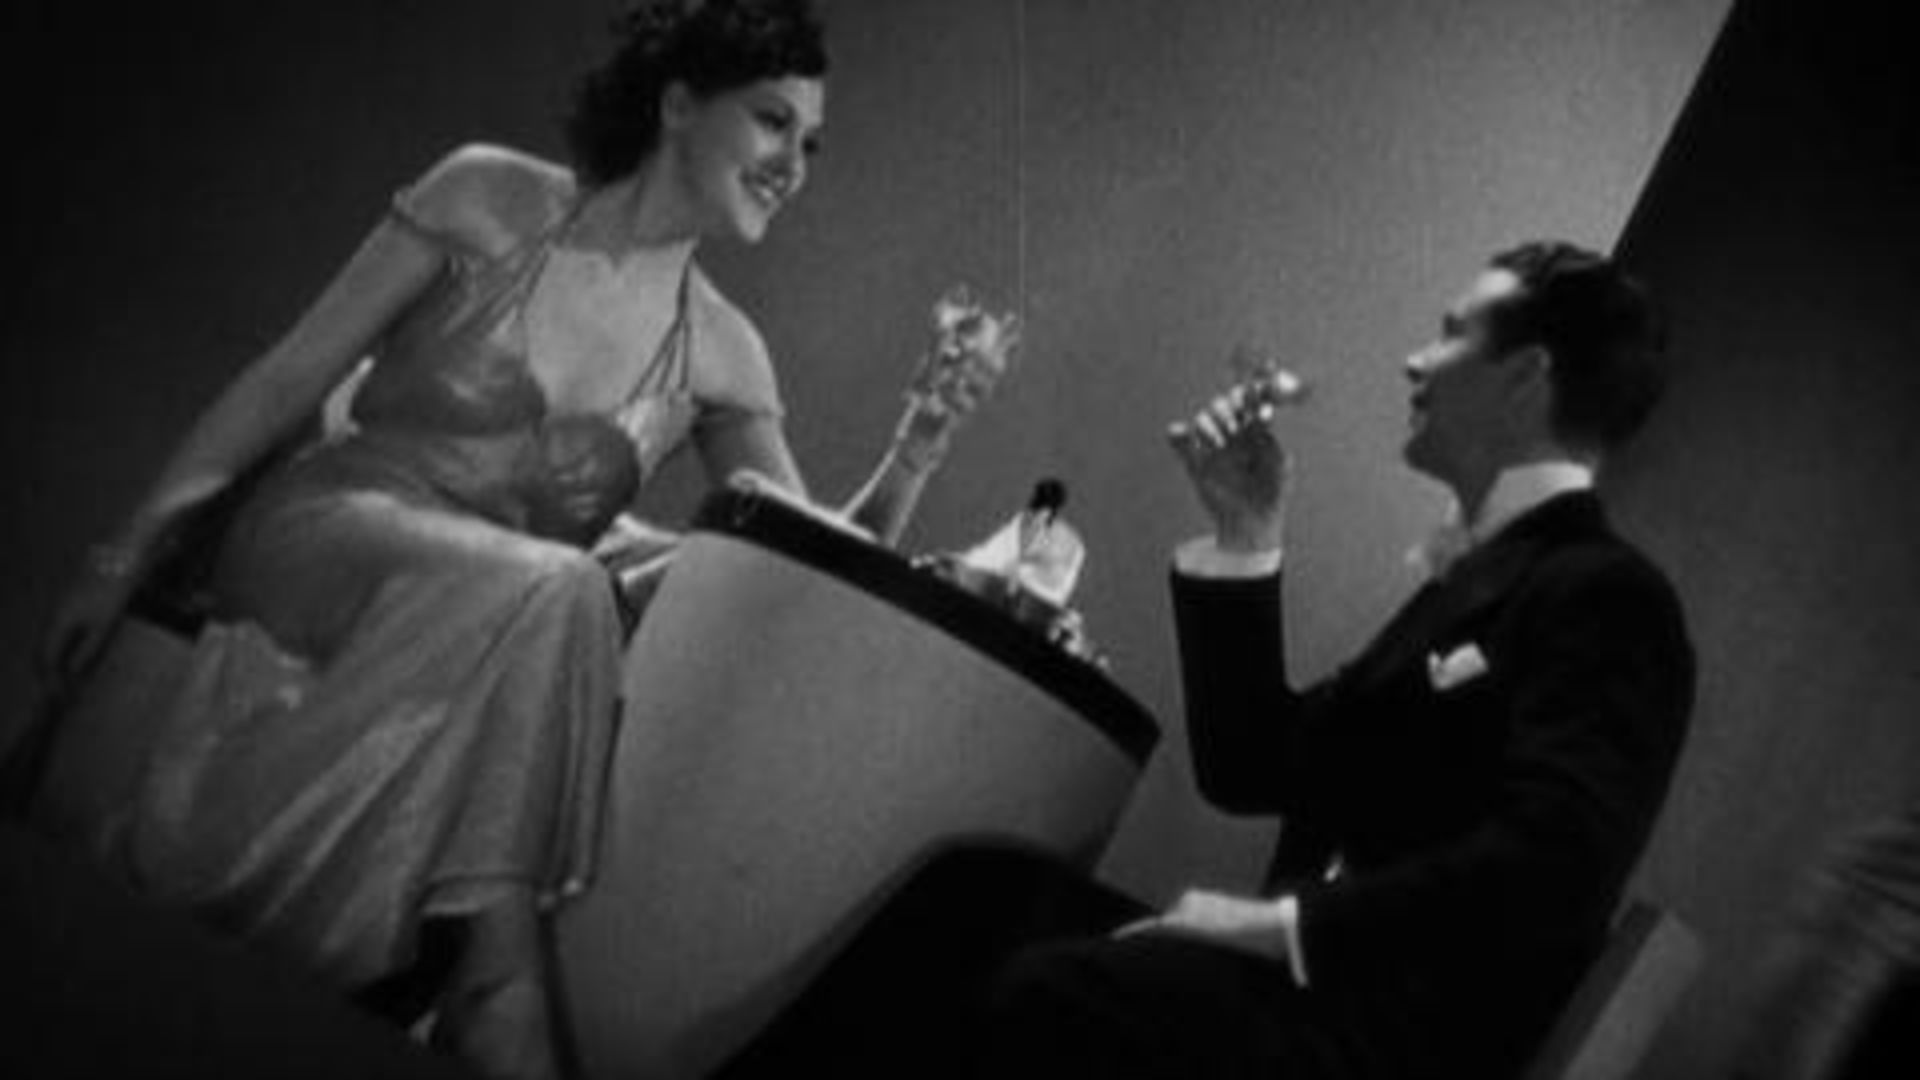 Gold Diggers of 1935 (1935) - Part 2 of Lullaby of Broadway